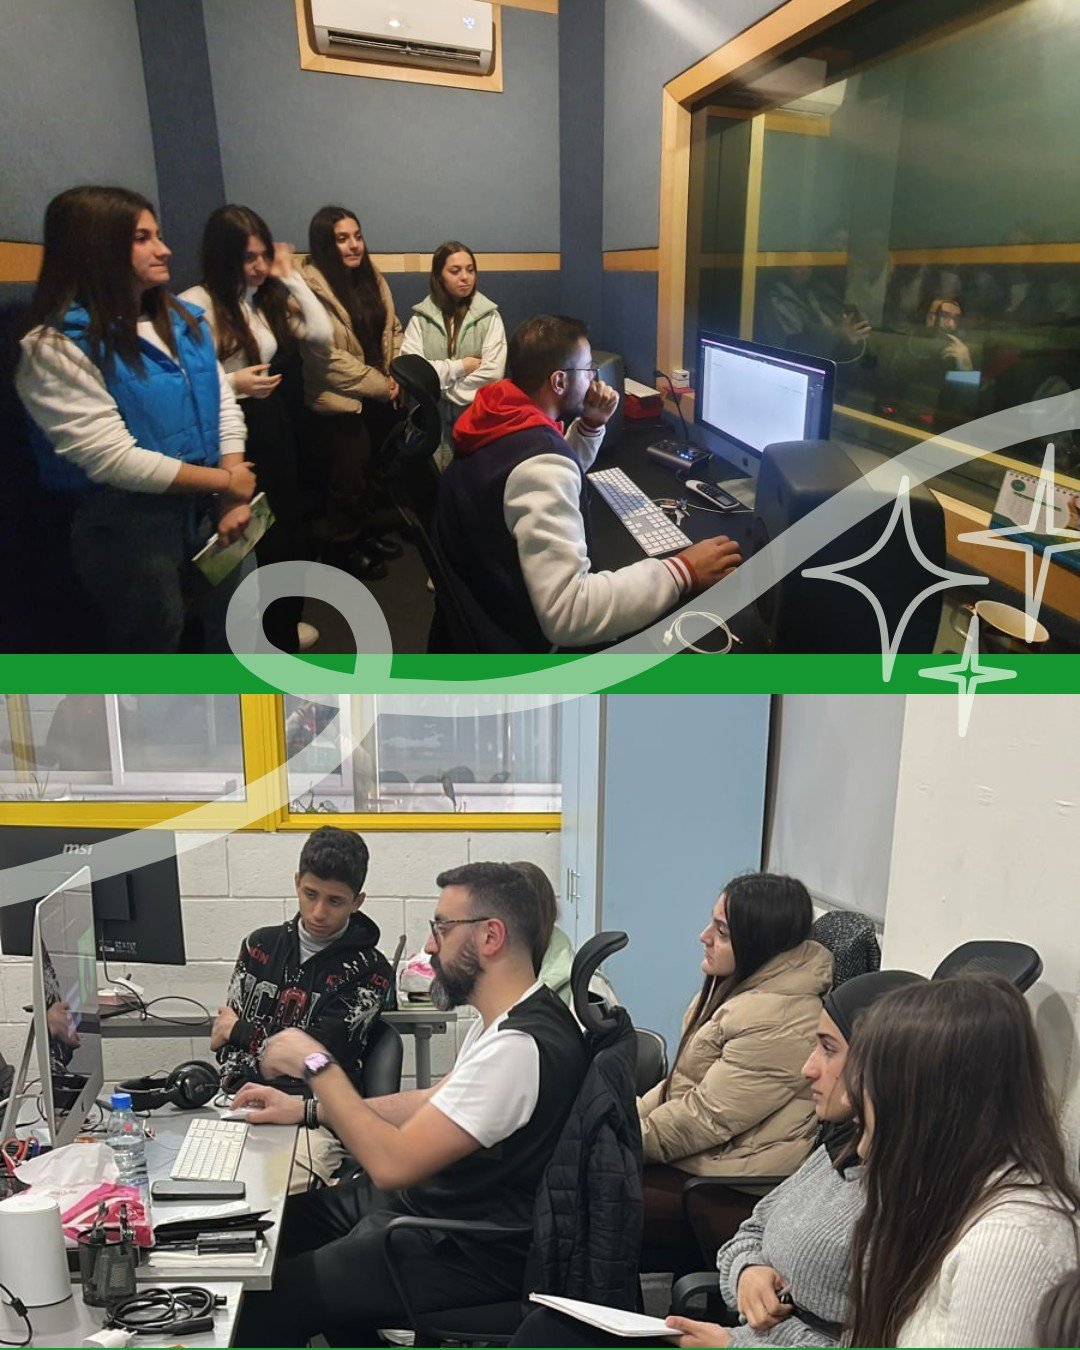 School of Hope students had the opportunity to learn media and editing skills at the MEC. 

God continues to provide resources for our students and expand their creative abilities. 🙌🏼

#SchoolofHope #HorizonsInternational #GreatCommission